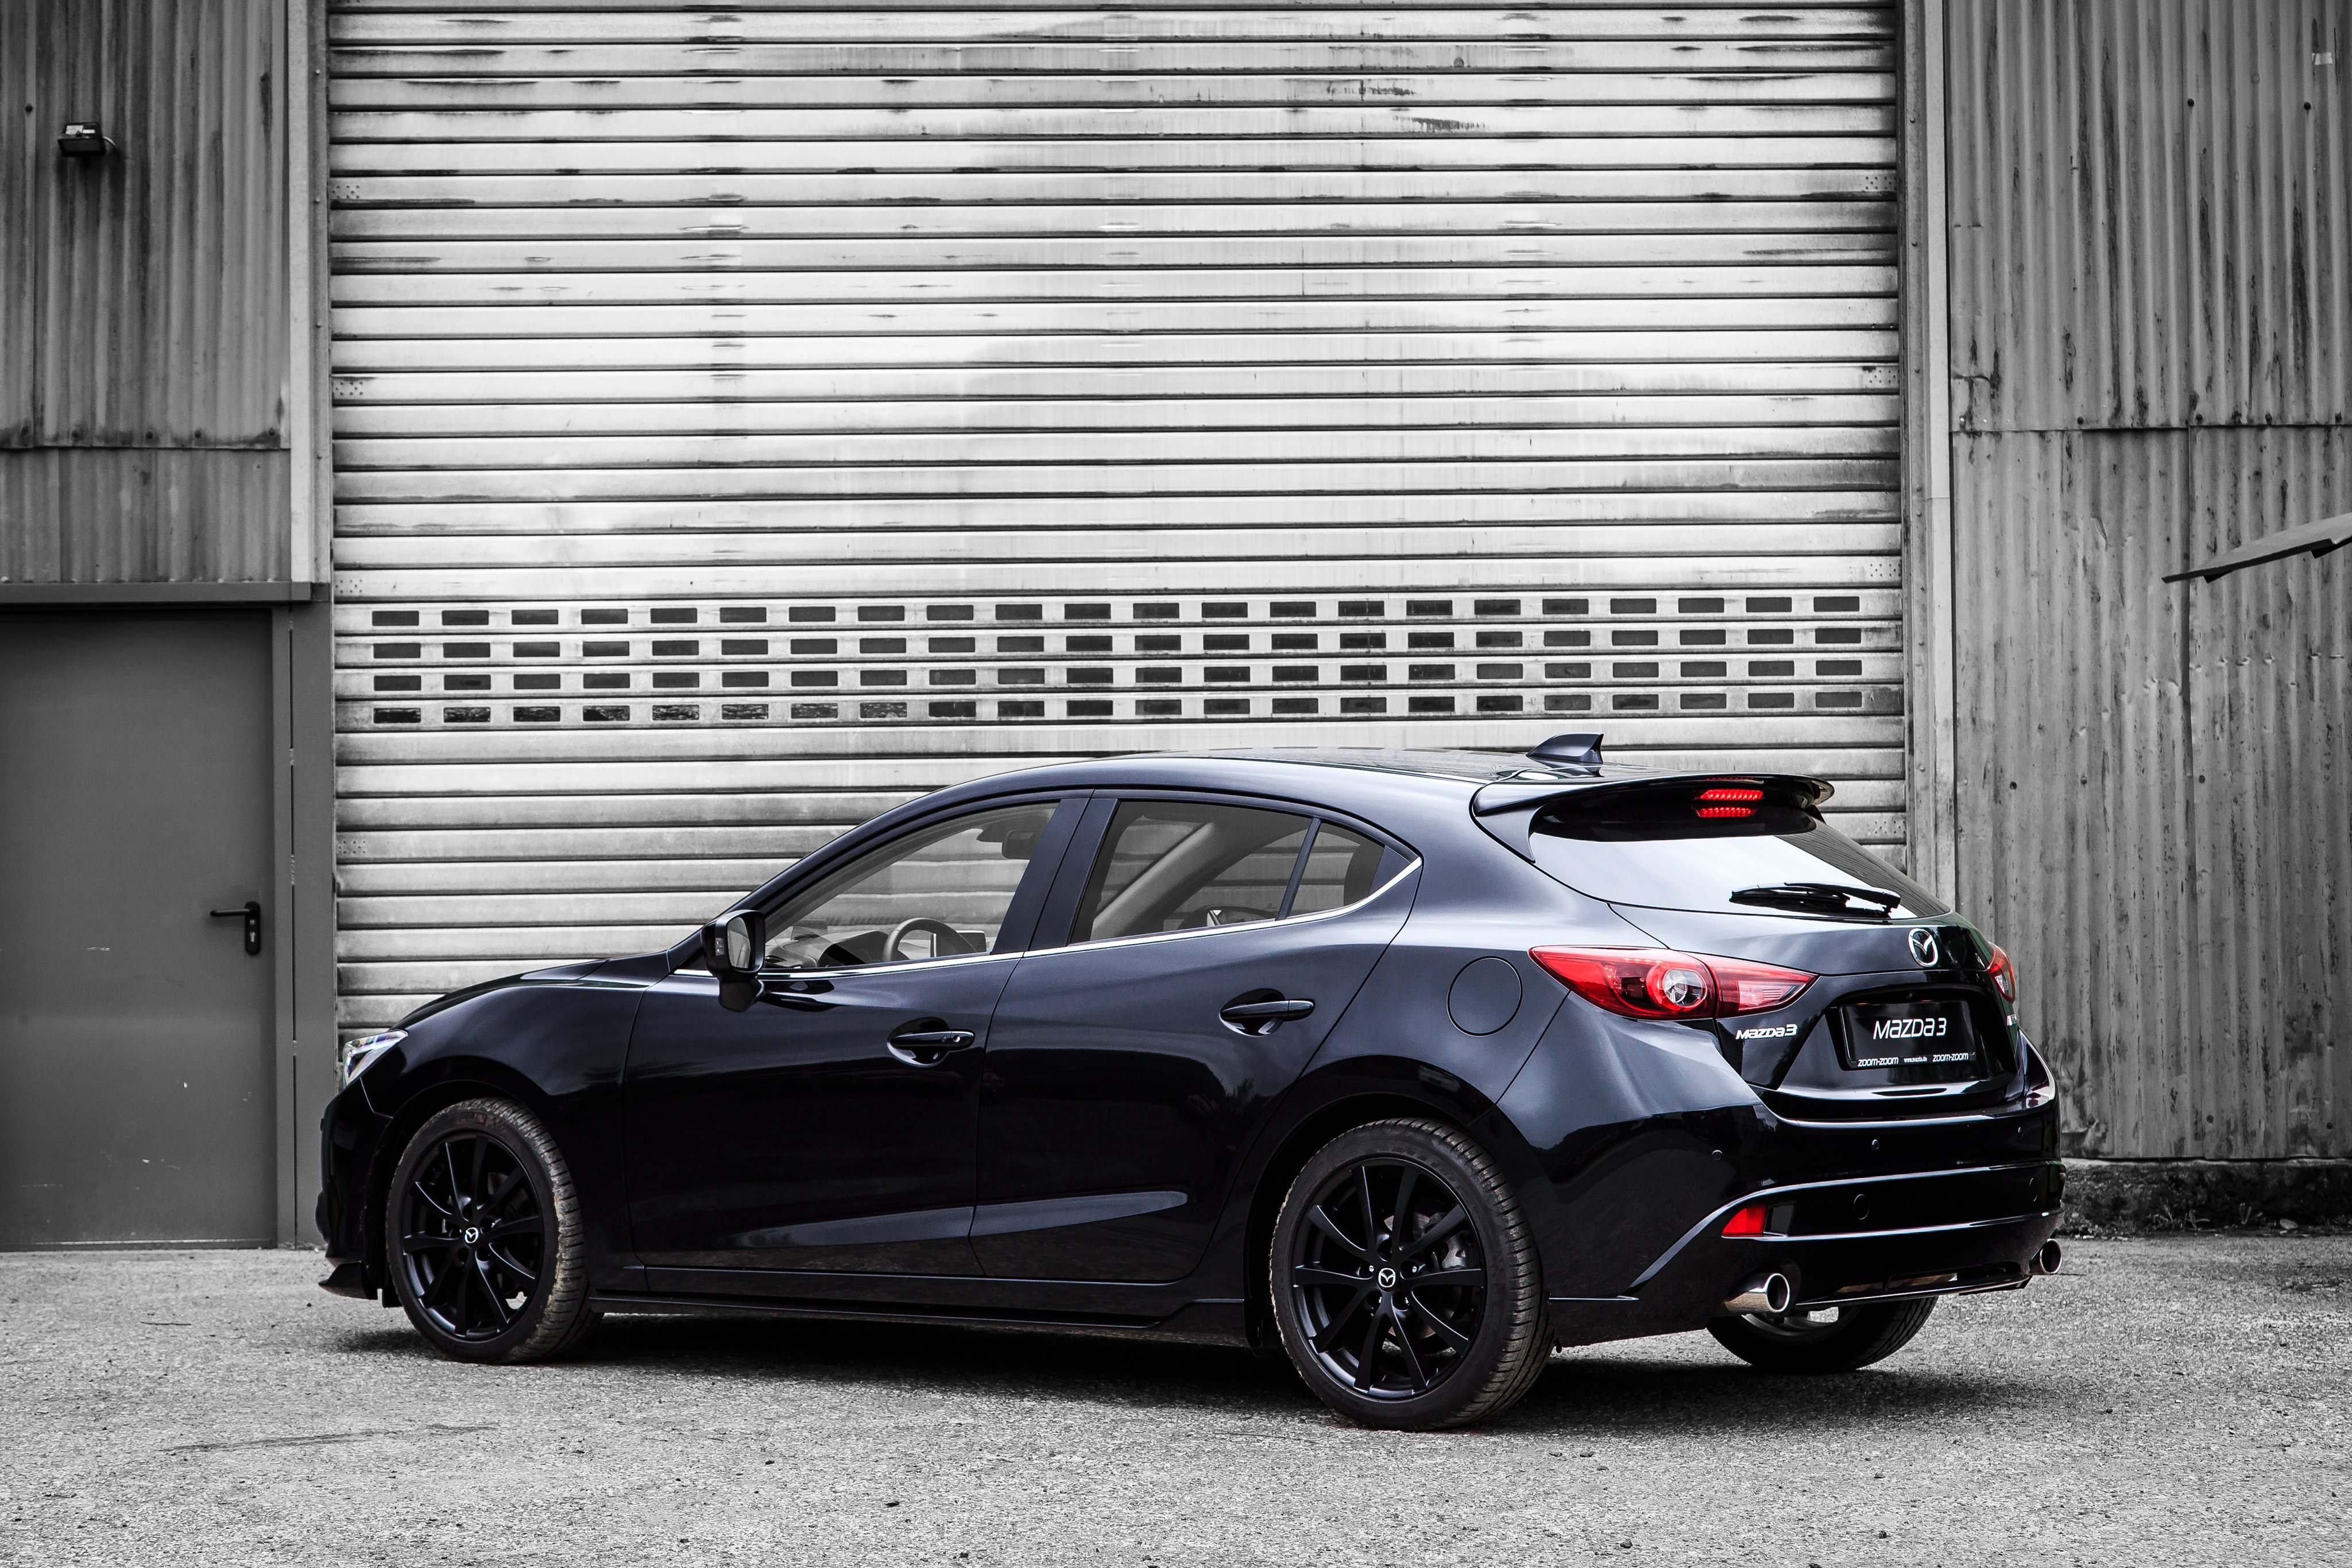 15 Mazda3 Black Limited B M Mazda Wallpapers Hd Desktop And Mobile Backgrounds